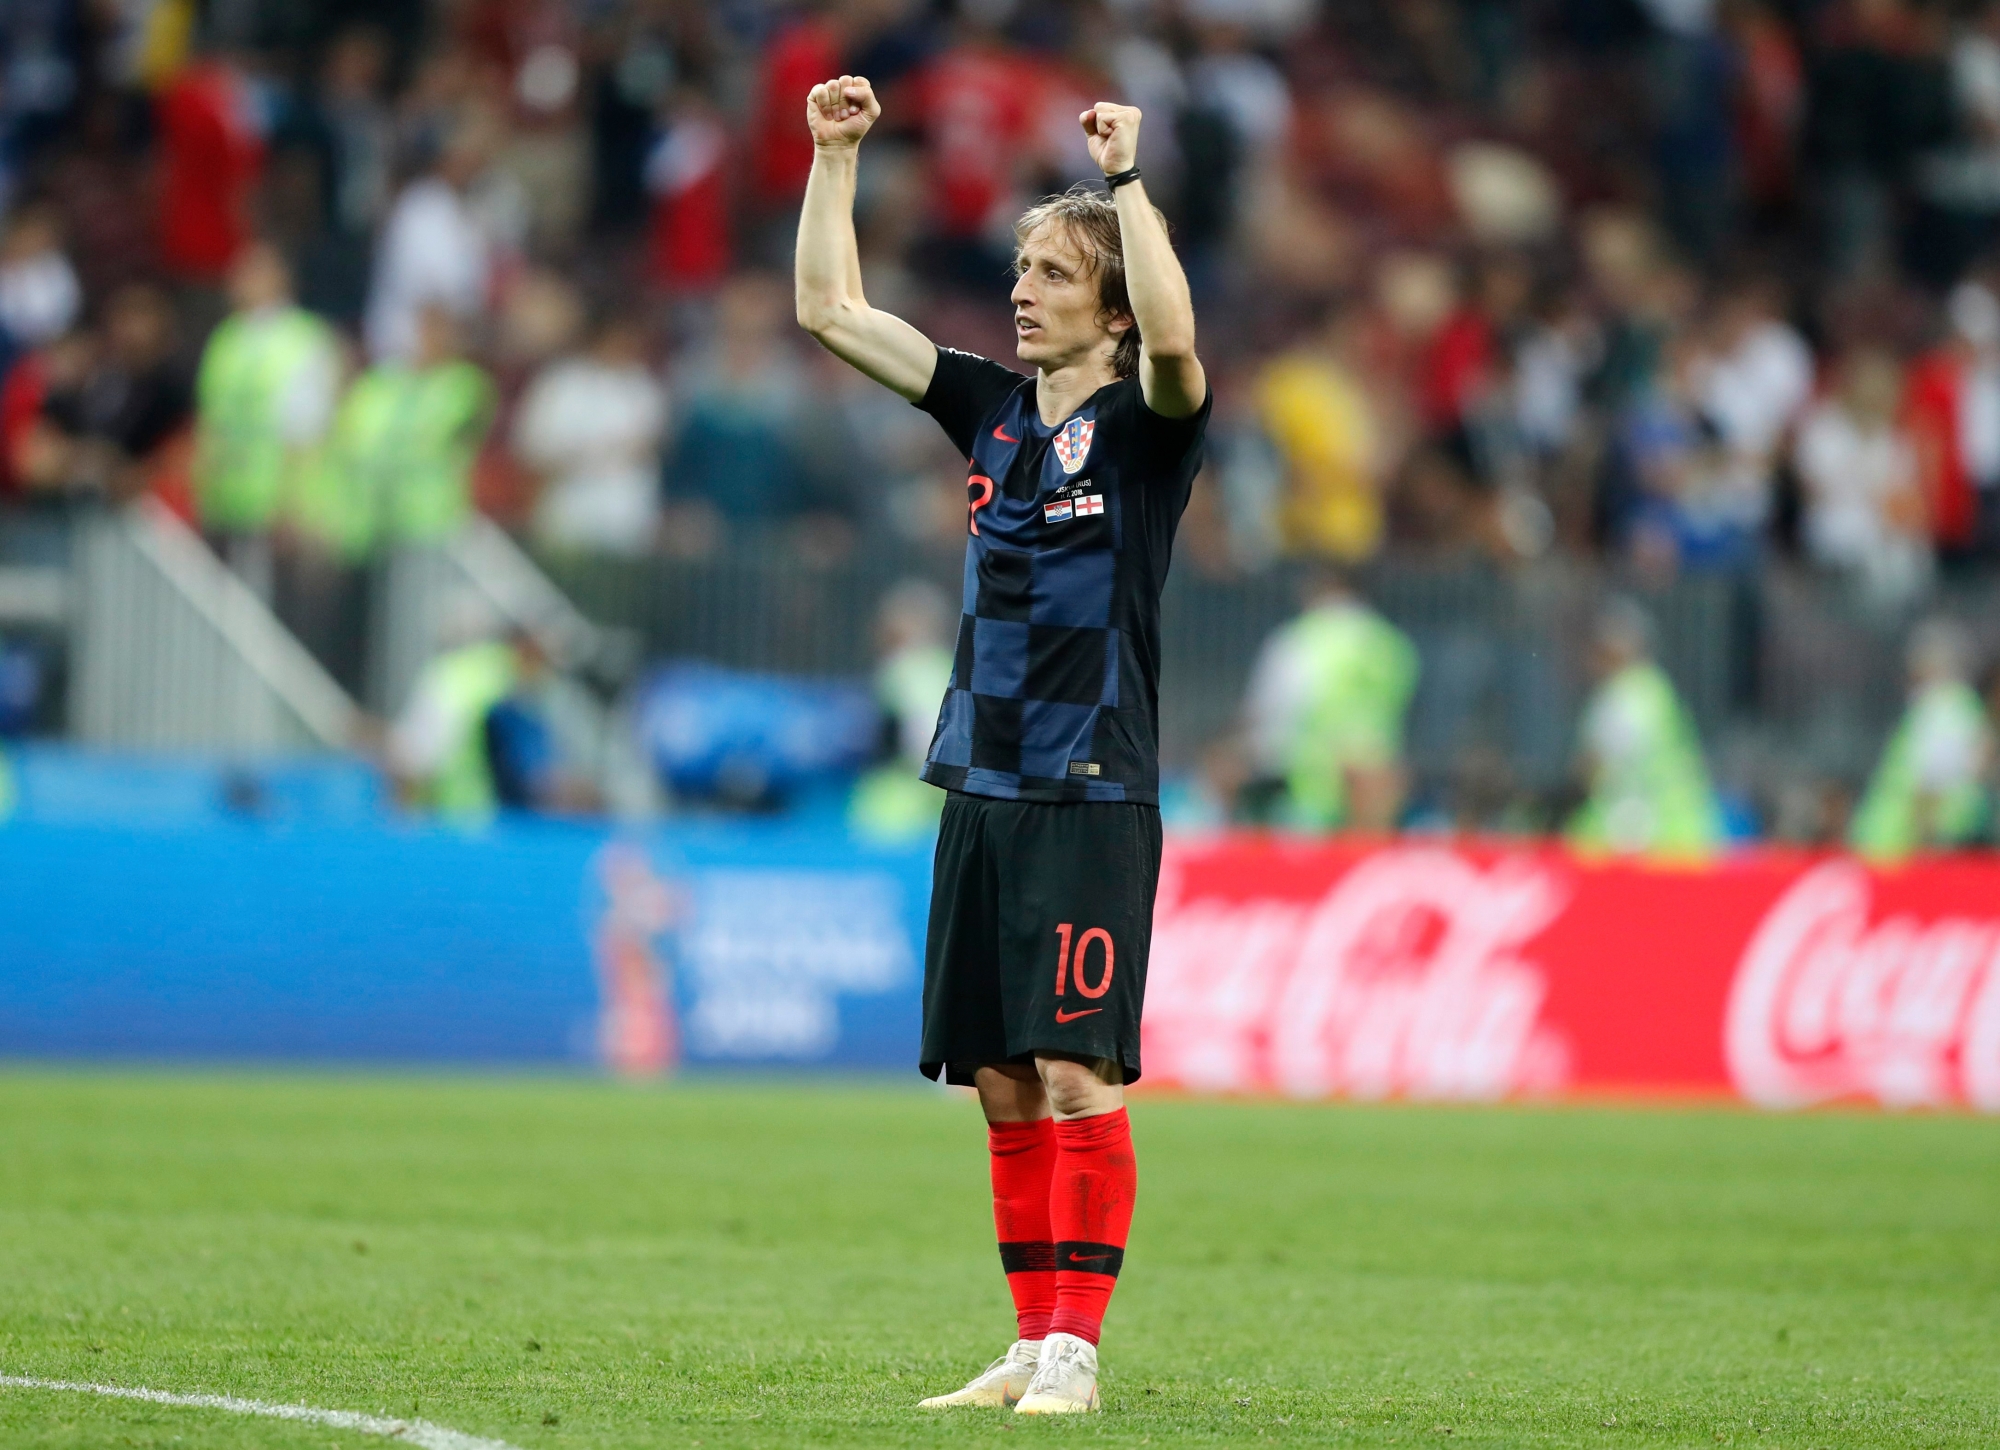 Croatia's Luka Modric celebrates after his team advanced to the final during the semifinal match between Croatia and England at the 2018 soccer World Cup in the Luzhniki Stadium in Moscow, Russia, Wednesday, July 11, 2018. (AP Photo/Frank Augstein) Russia Soccer WCup Croatia England